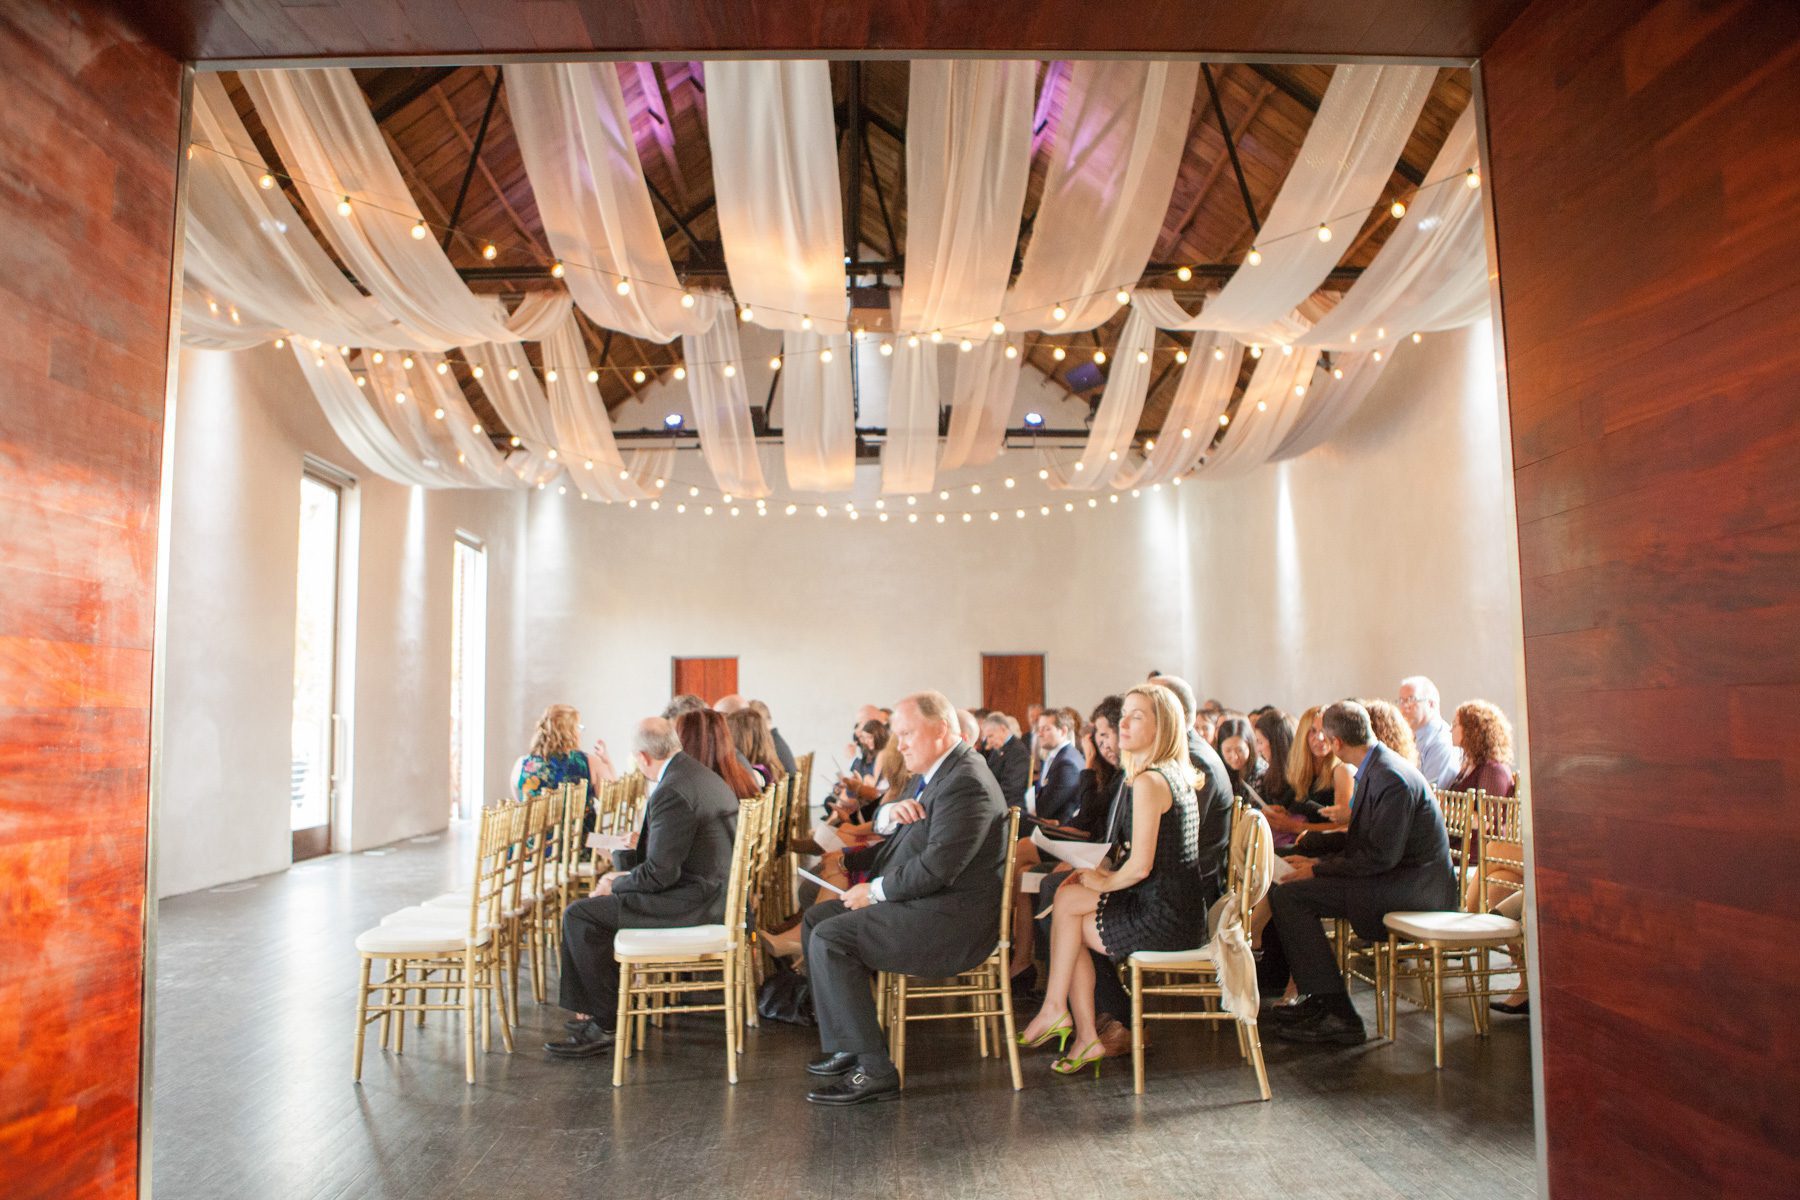 Ceremony guests wedding venue at Ruby, Nashville TN. Wedding photography by Krista Lee, Krista Lee Photography Franklin TN